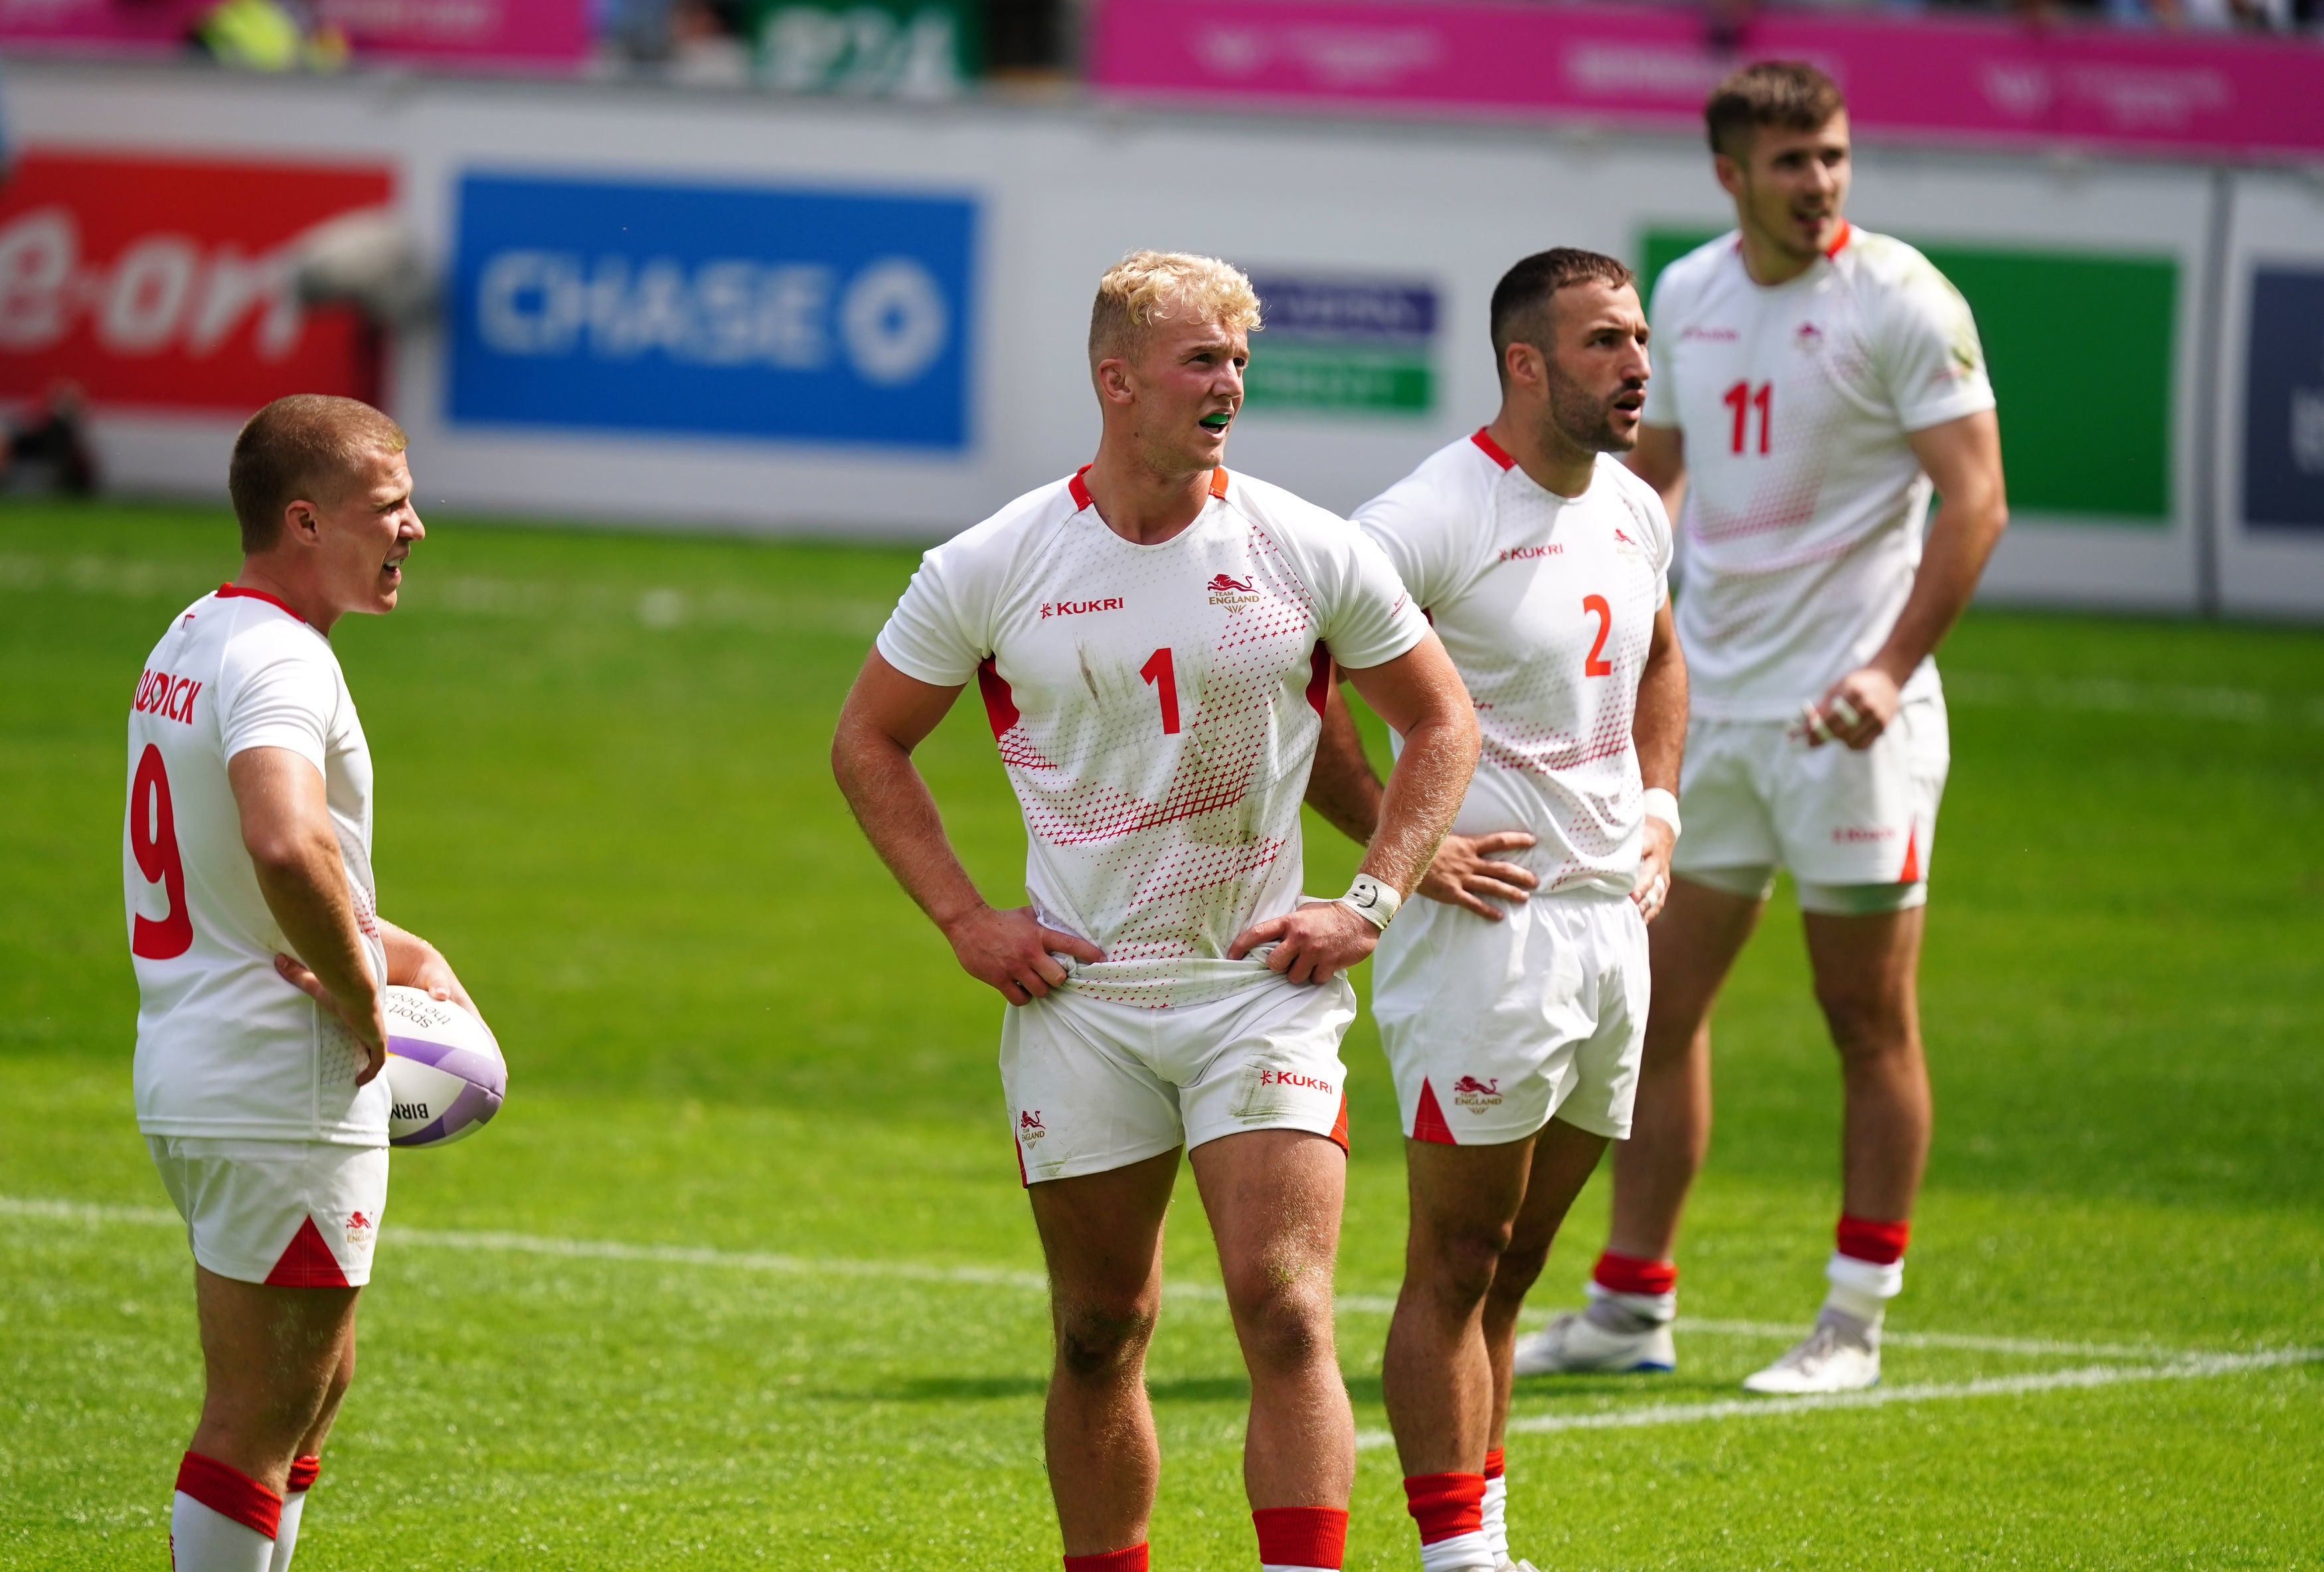 Rugby sevens turmoil worsened by dismal Commonwealth Games for home nations The Independent